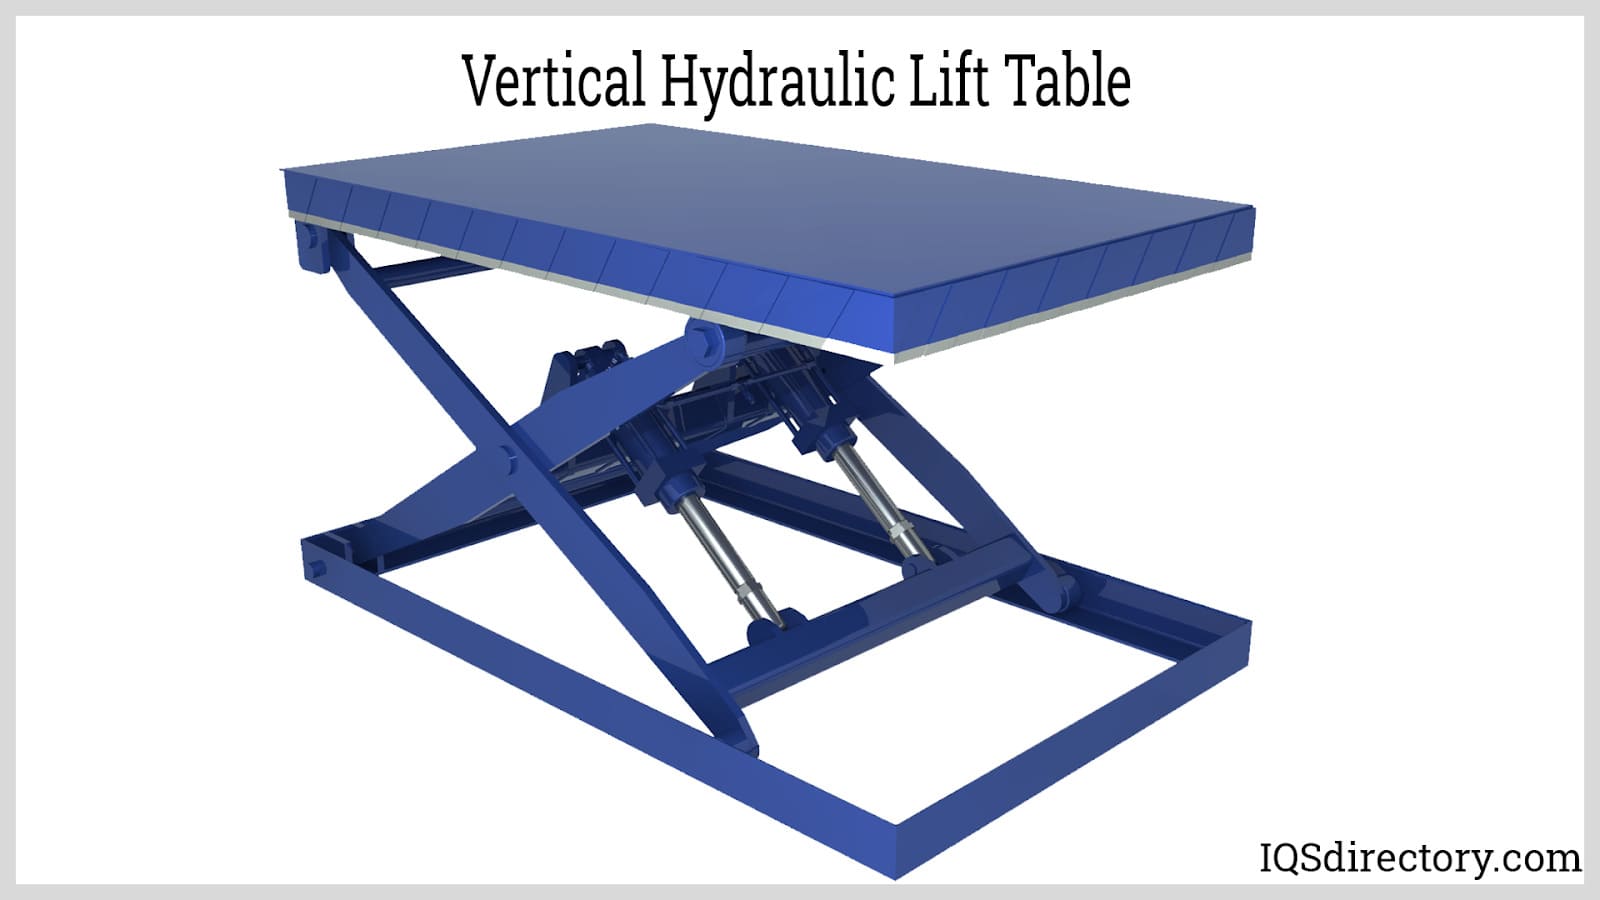 Hydraulic Lift: What is it, How it Works, Types, Application